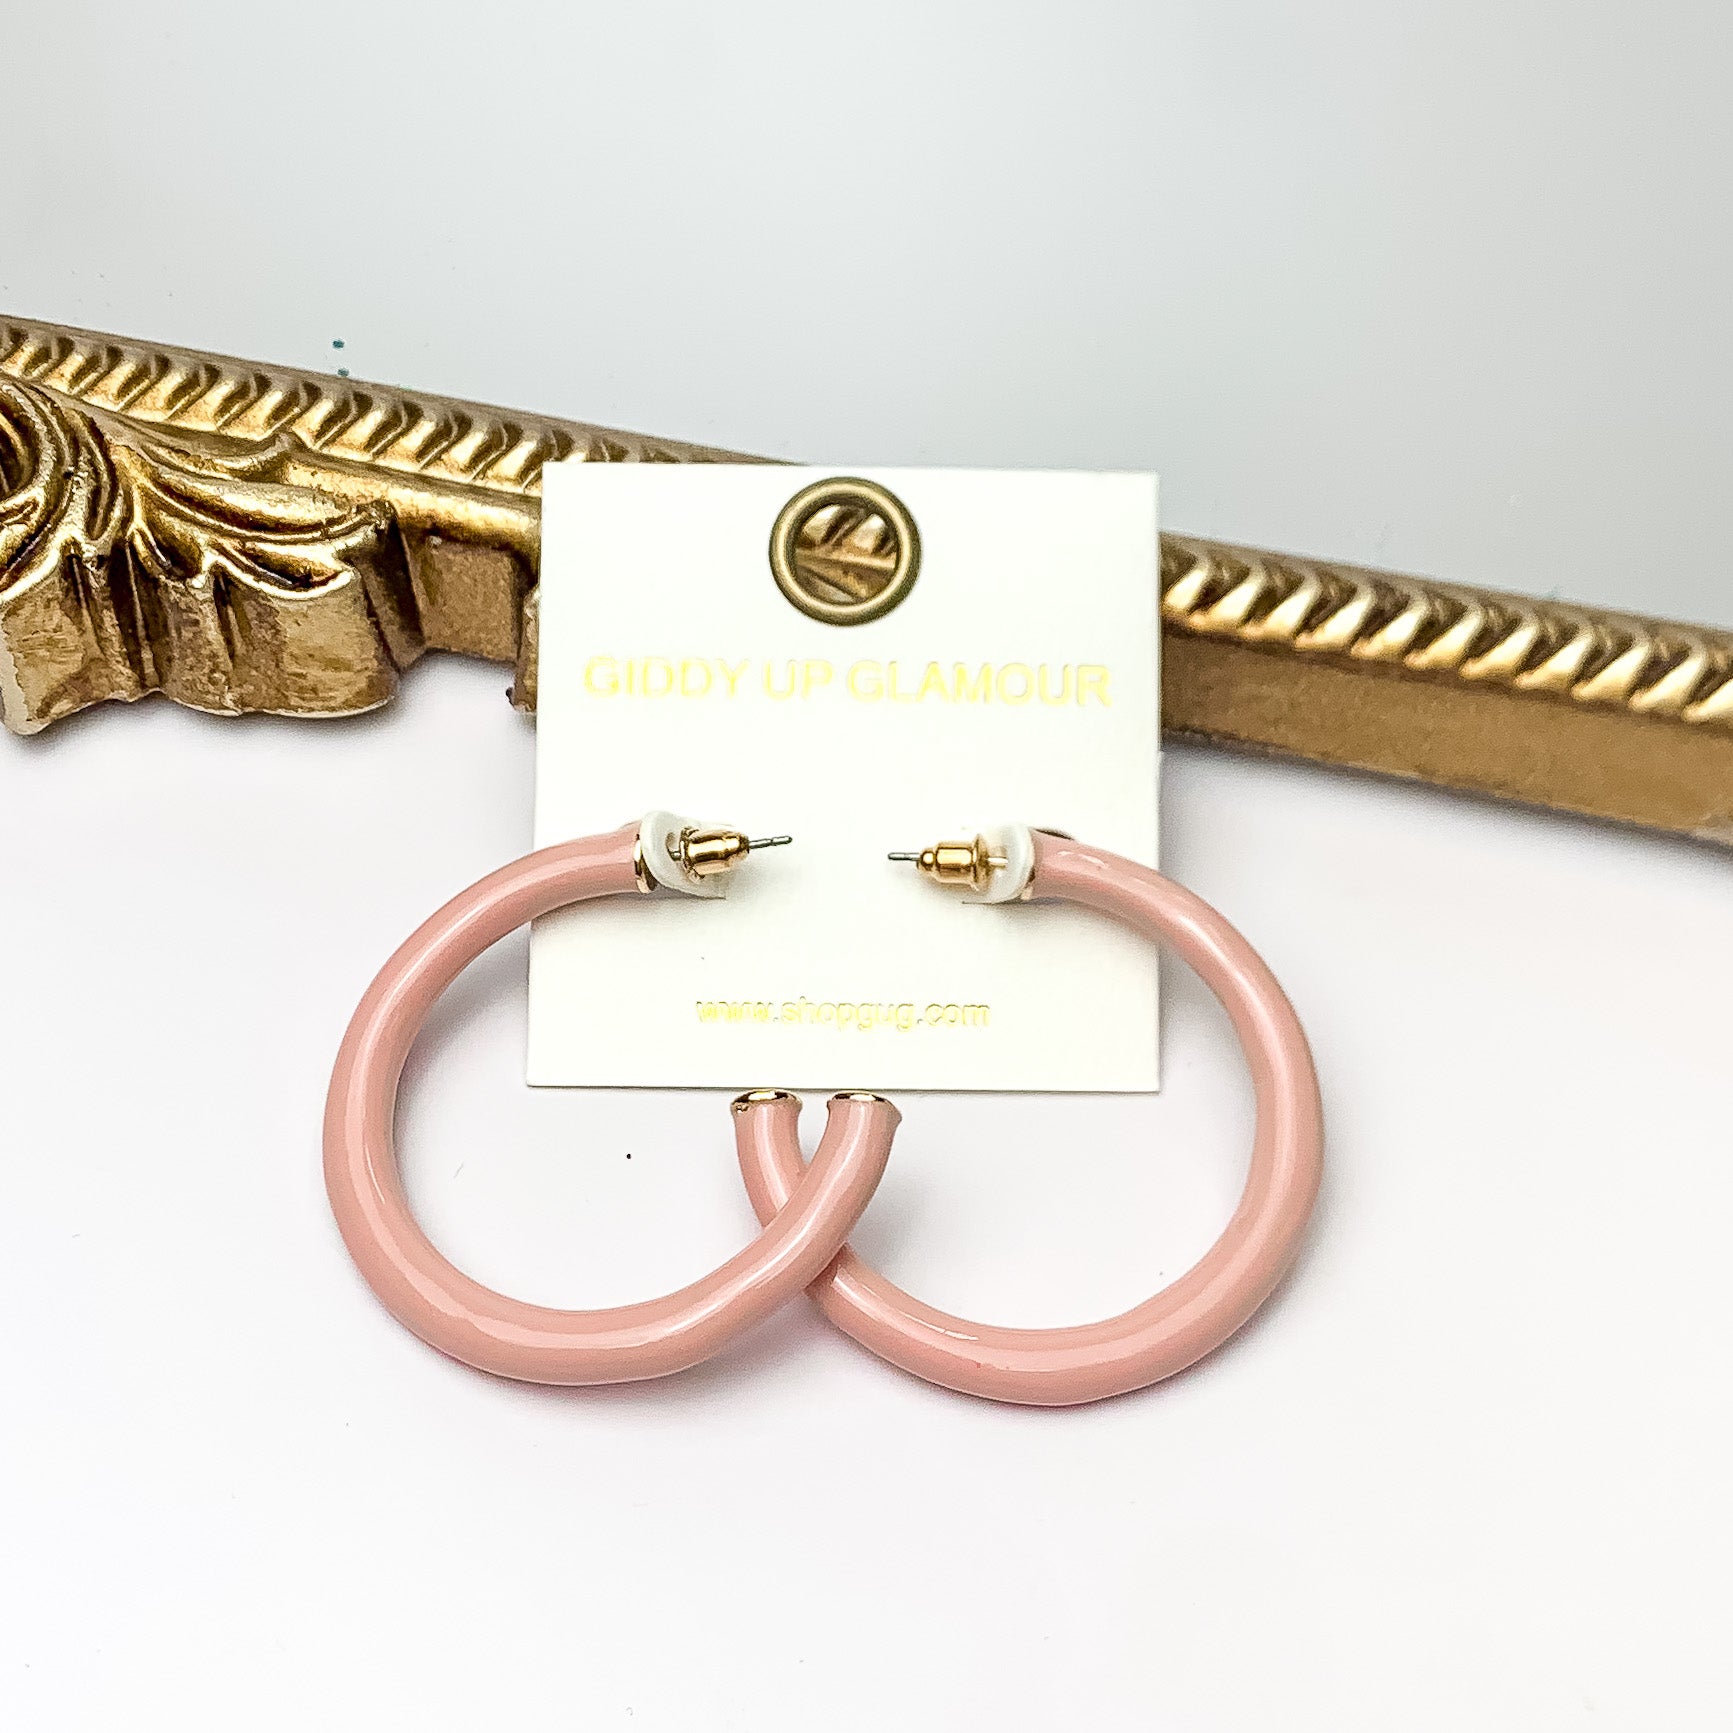 Plan For Cabo Large Hoop Earrings in Pale Pink. Pictured on a white background with a gold frame behind the earrings.